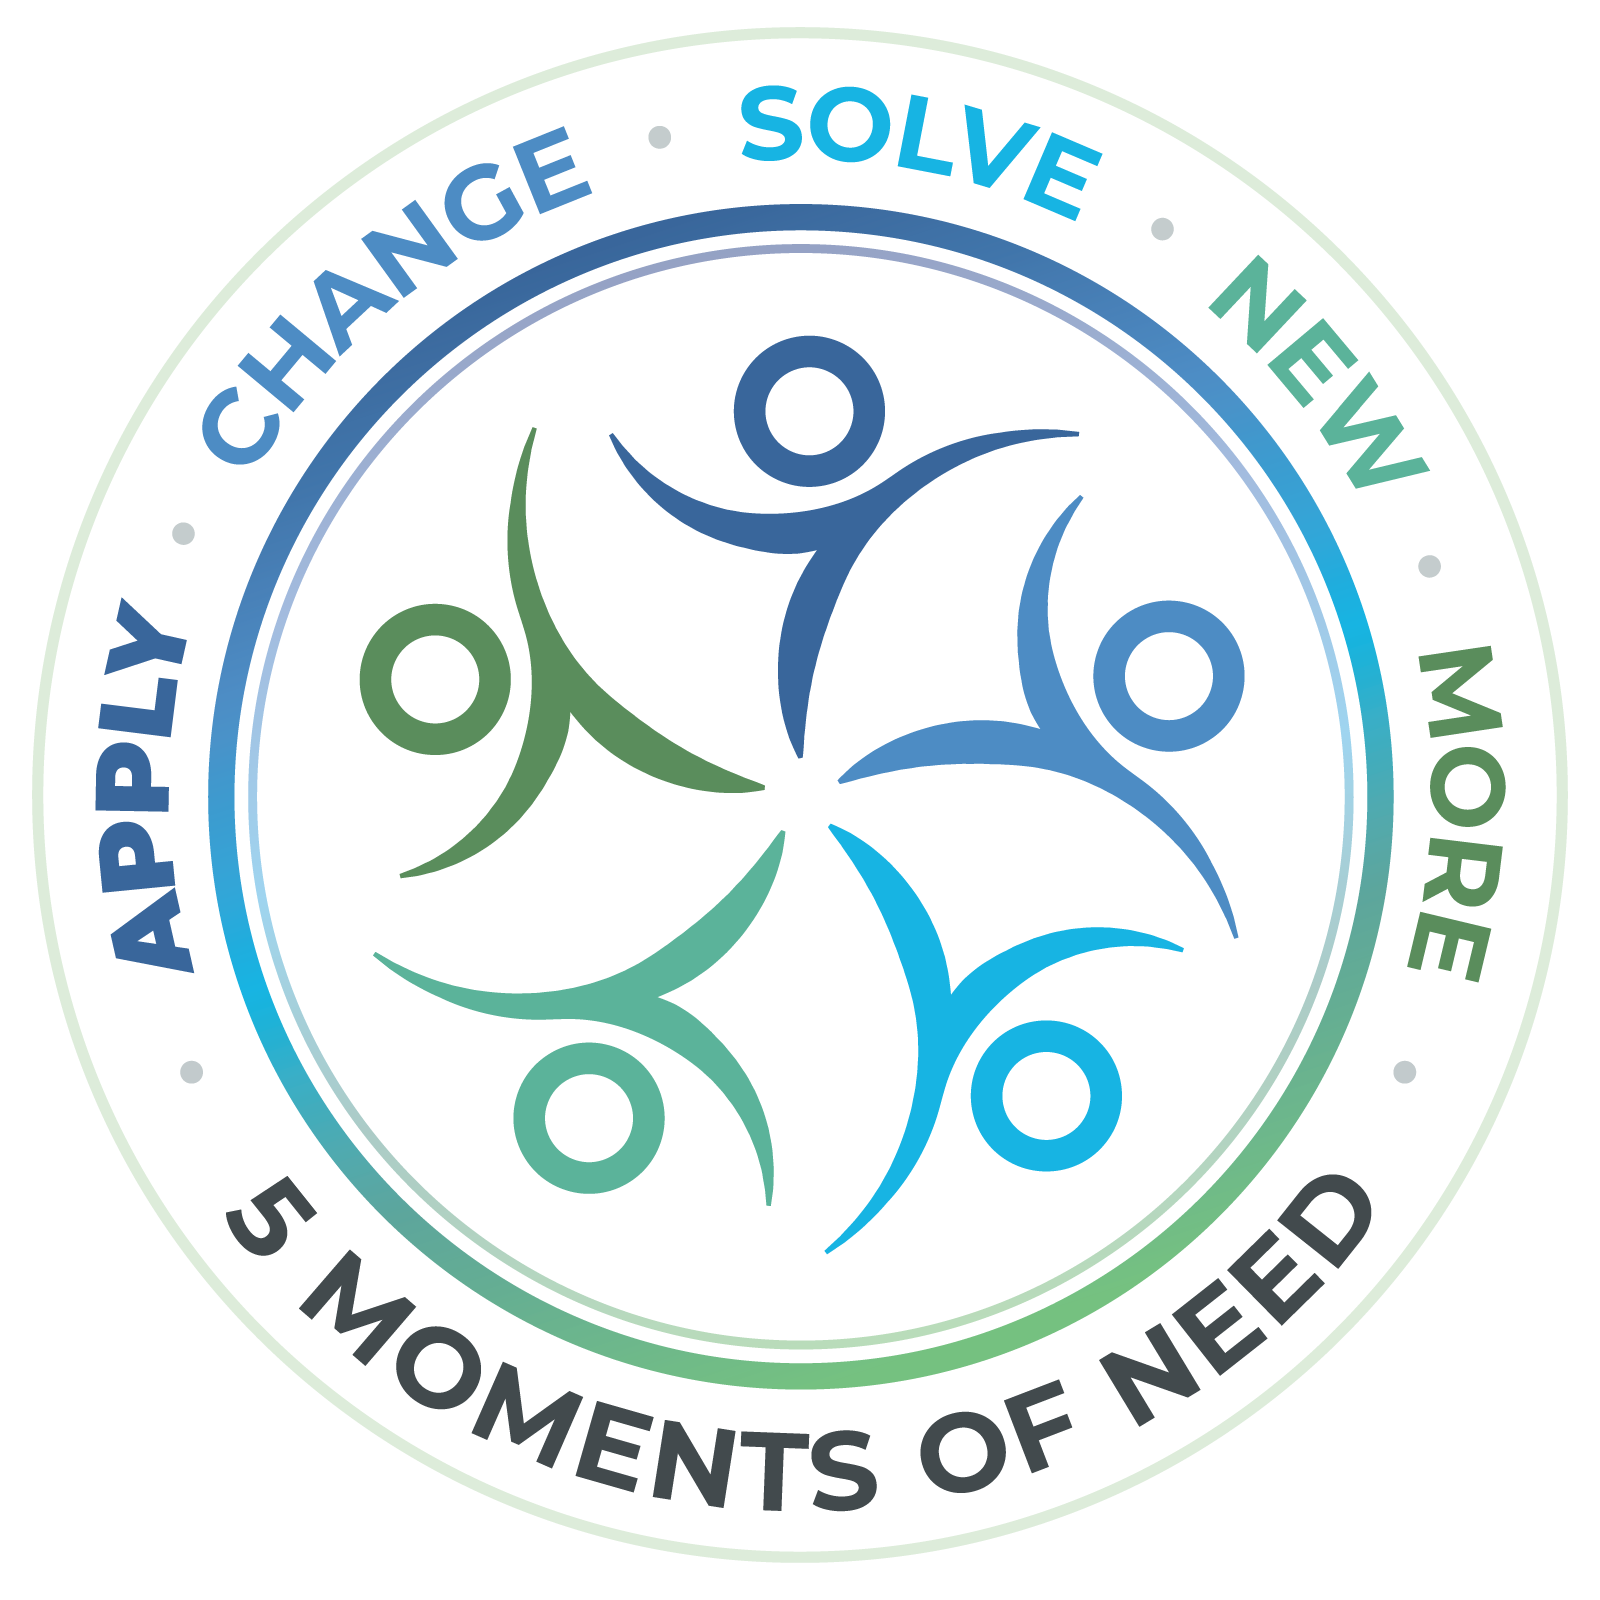 Performance Matters | A 5 Moments of Need® Podcast Series